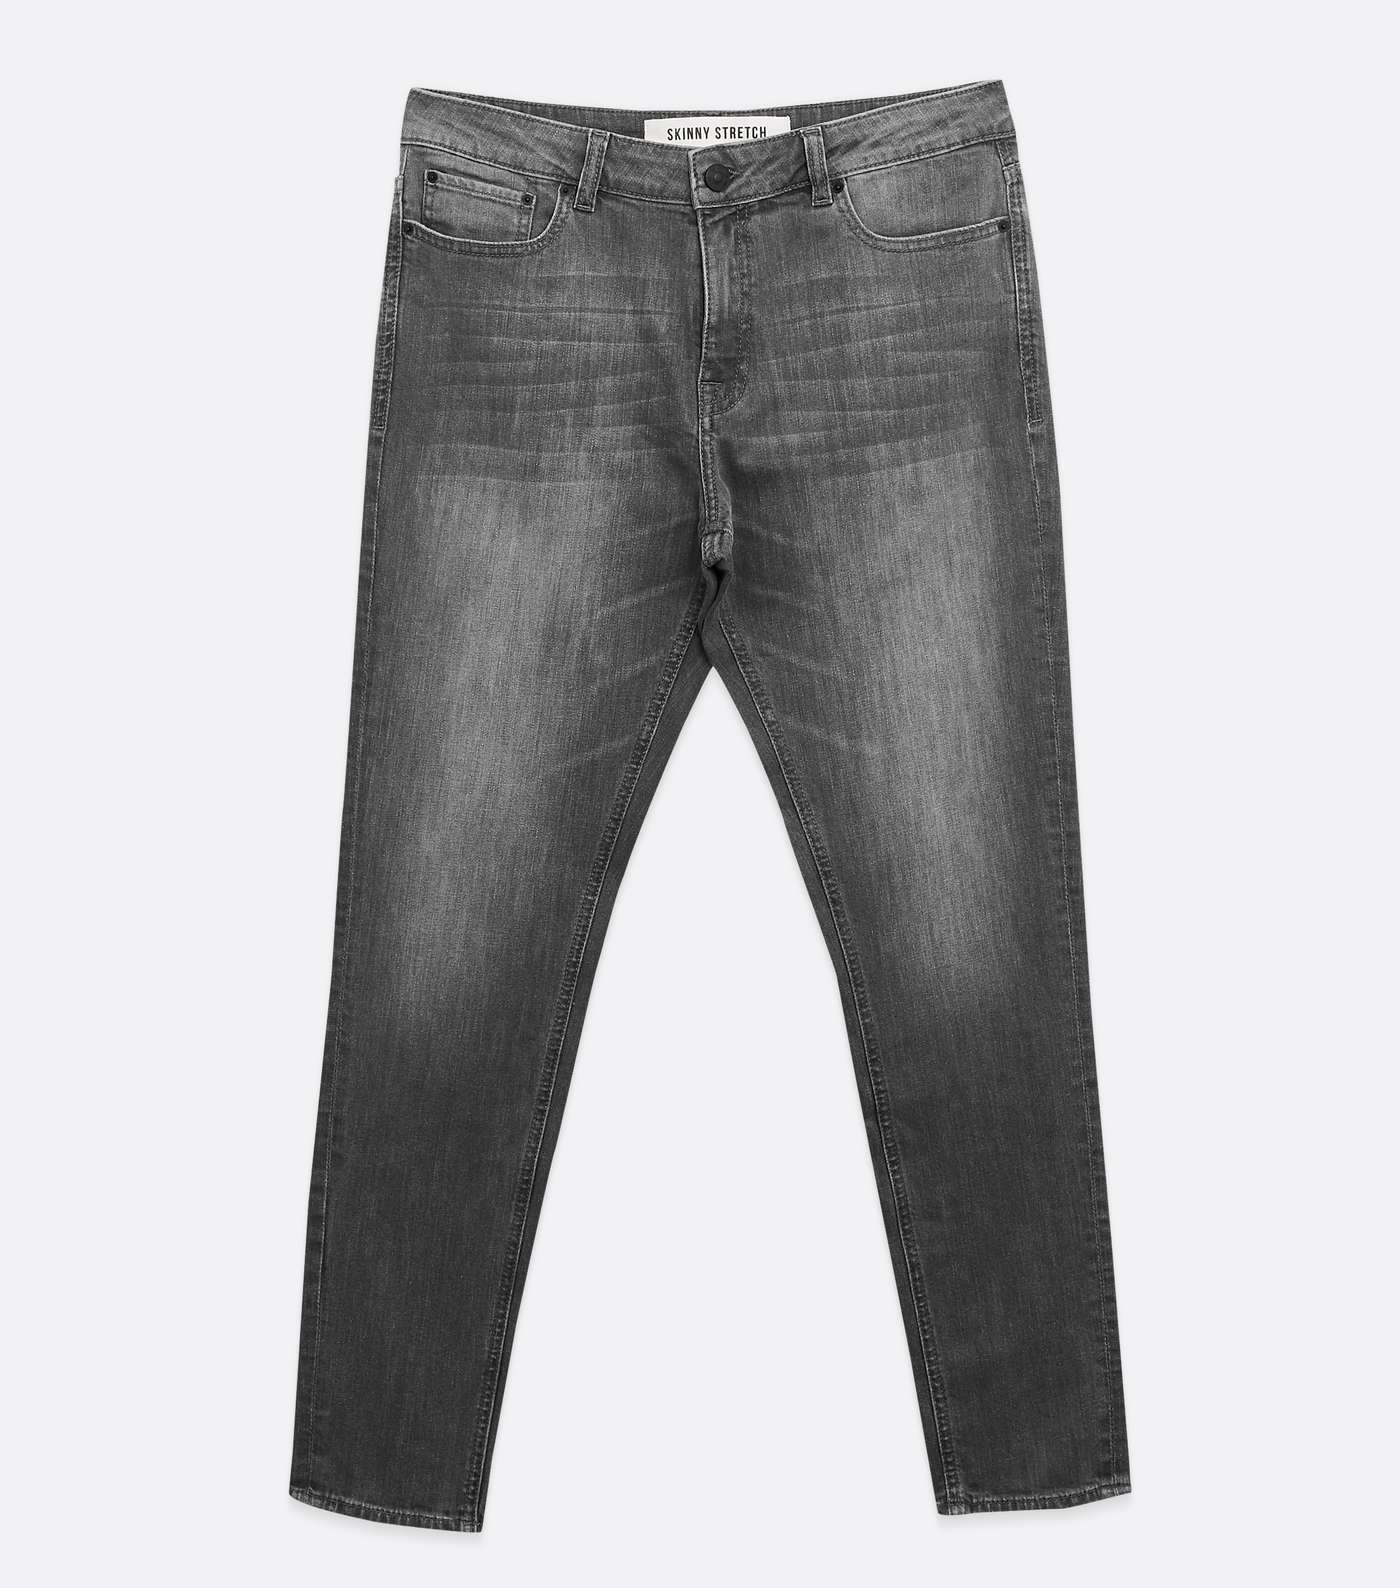 Pale Grey Washed Skinny Stretch Jeans Image 5